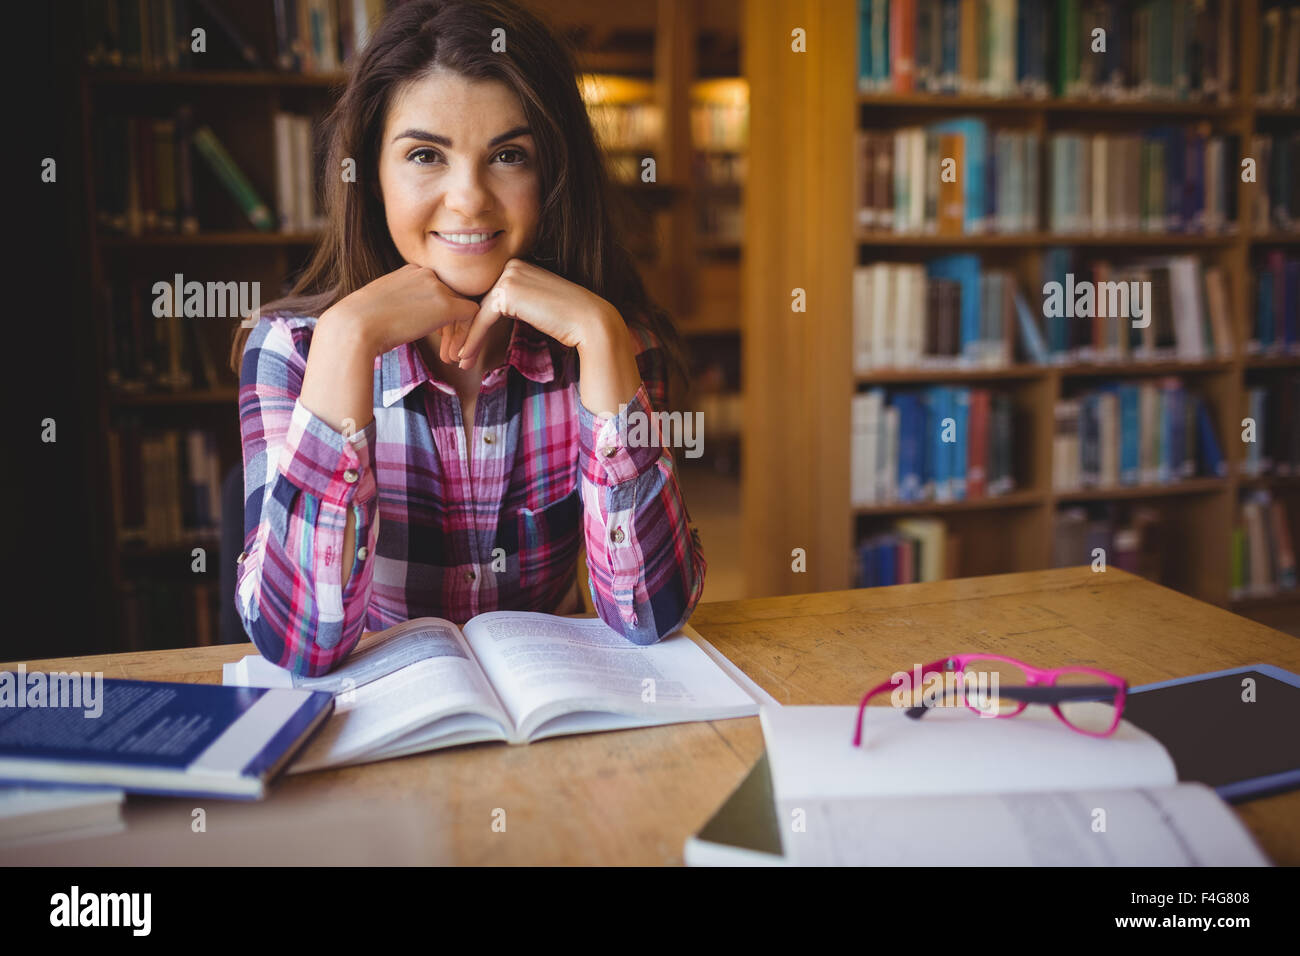 Confident female student with book at table Stock Photo